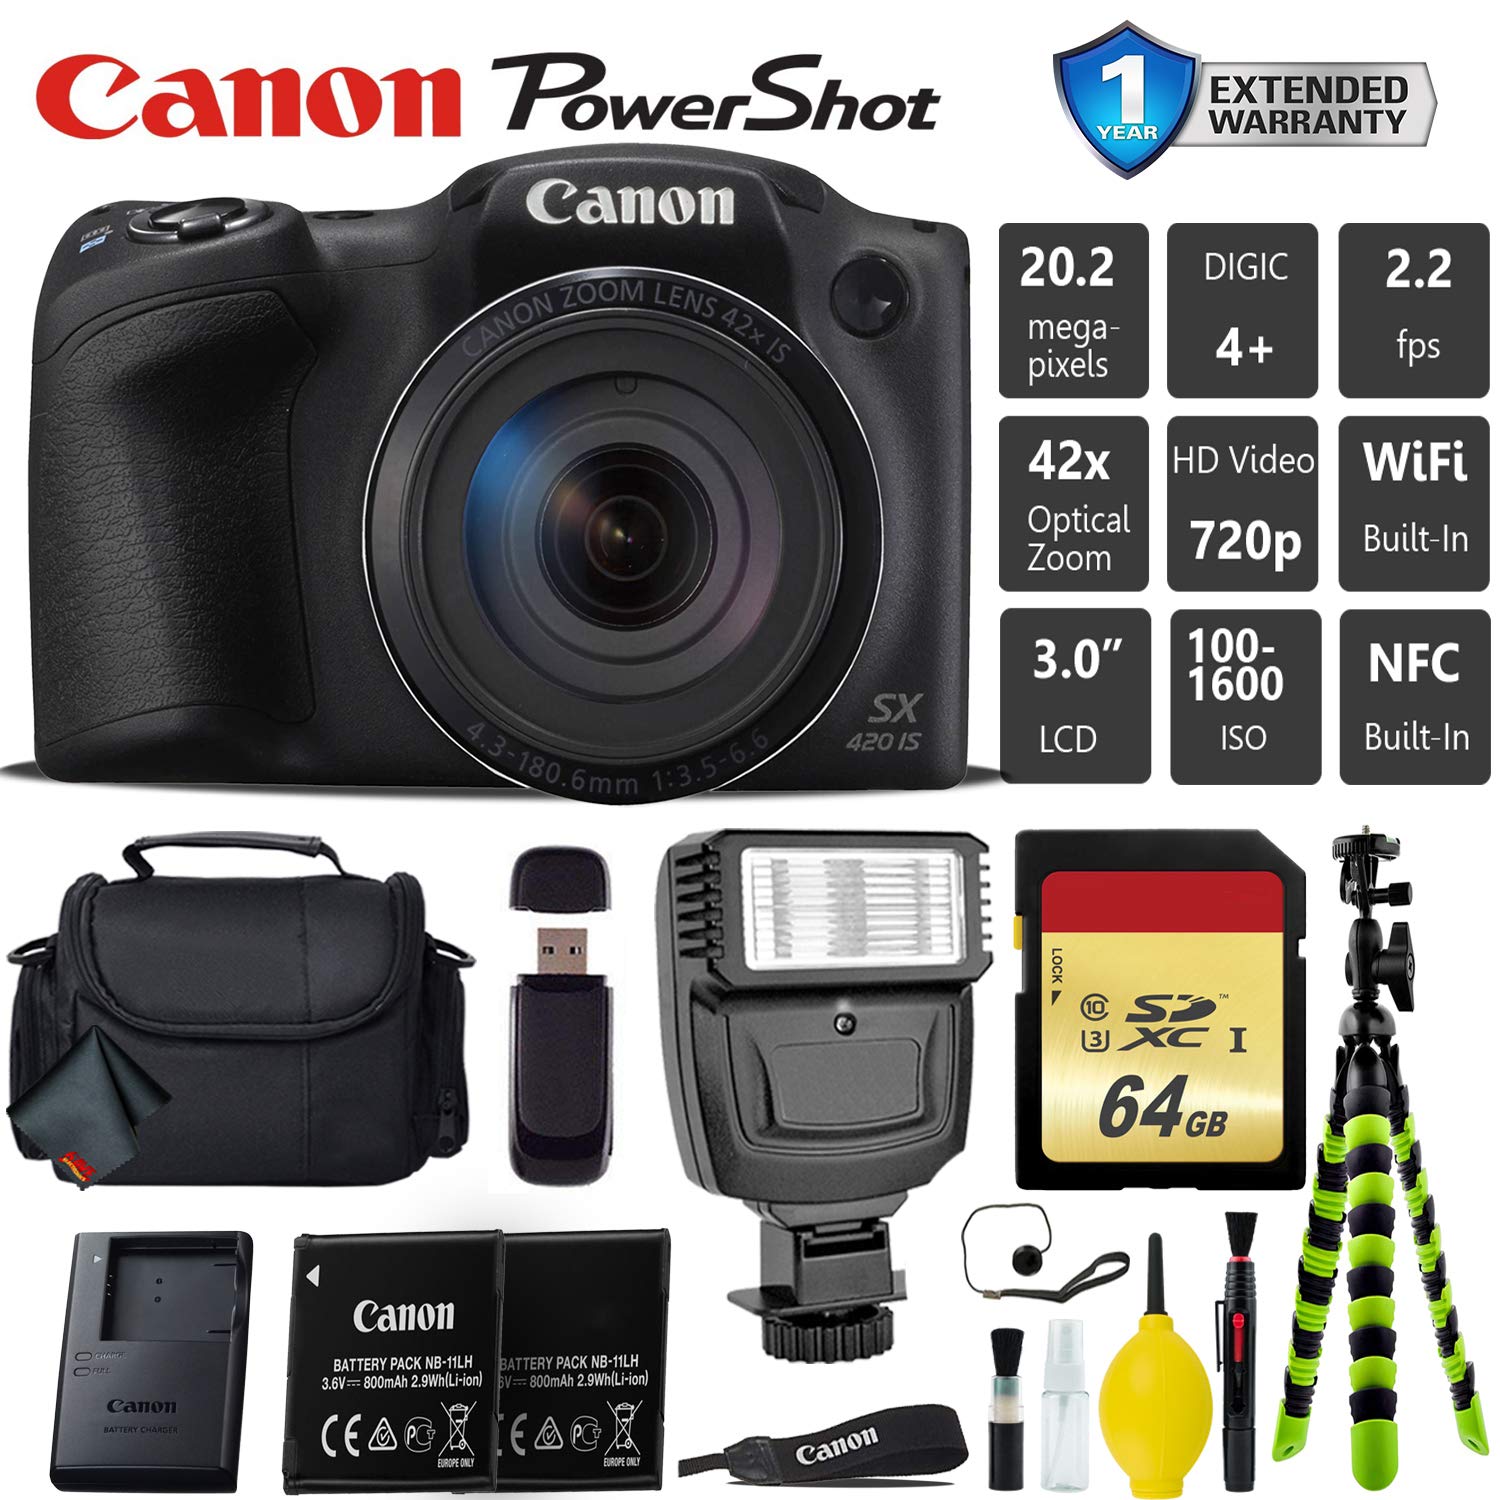 Canon PowerShot SX420 is Digital Point and Shoot Camera + Extra Battery + Digital Flash + Camera Case + 64GB Class 10 Card Pro Bundle